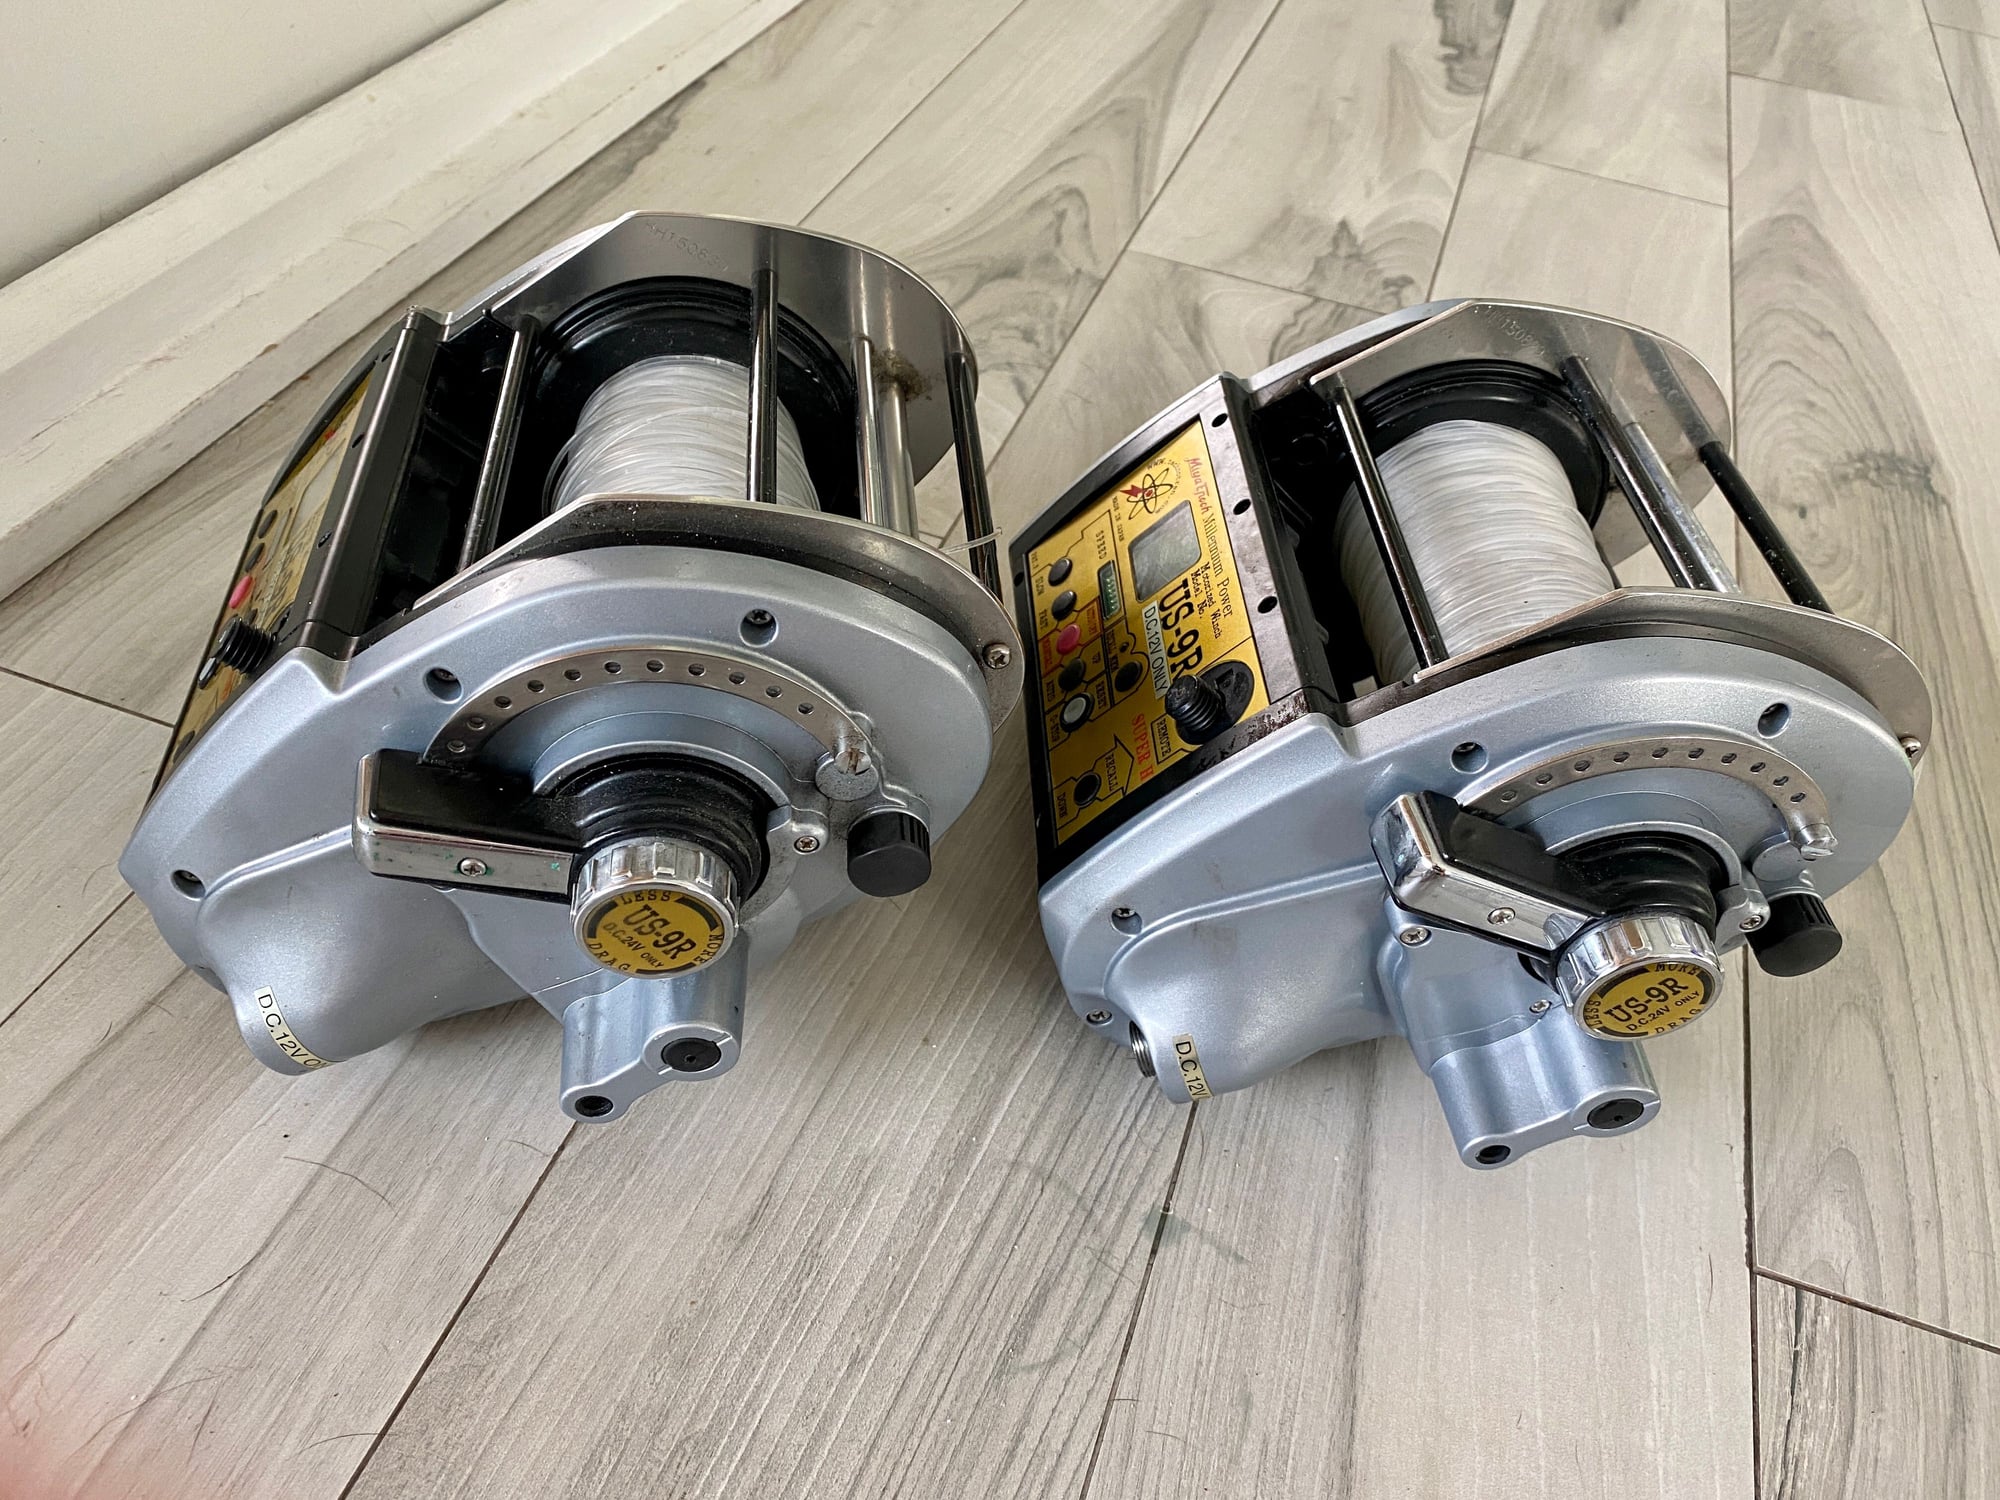 Miya Epoch electric teaser reel - The Hull Truth - Boating and Fishing Forum